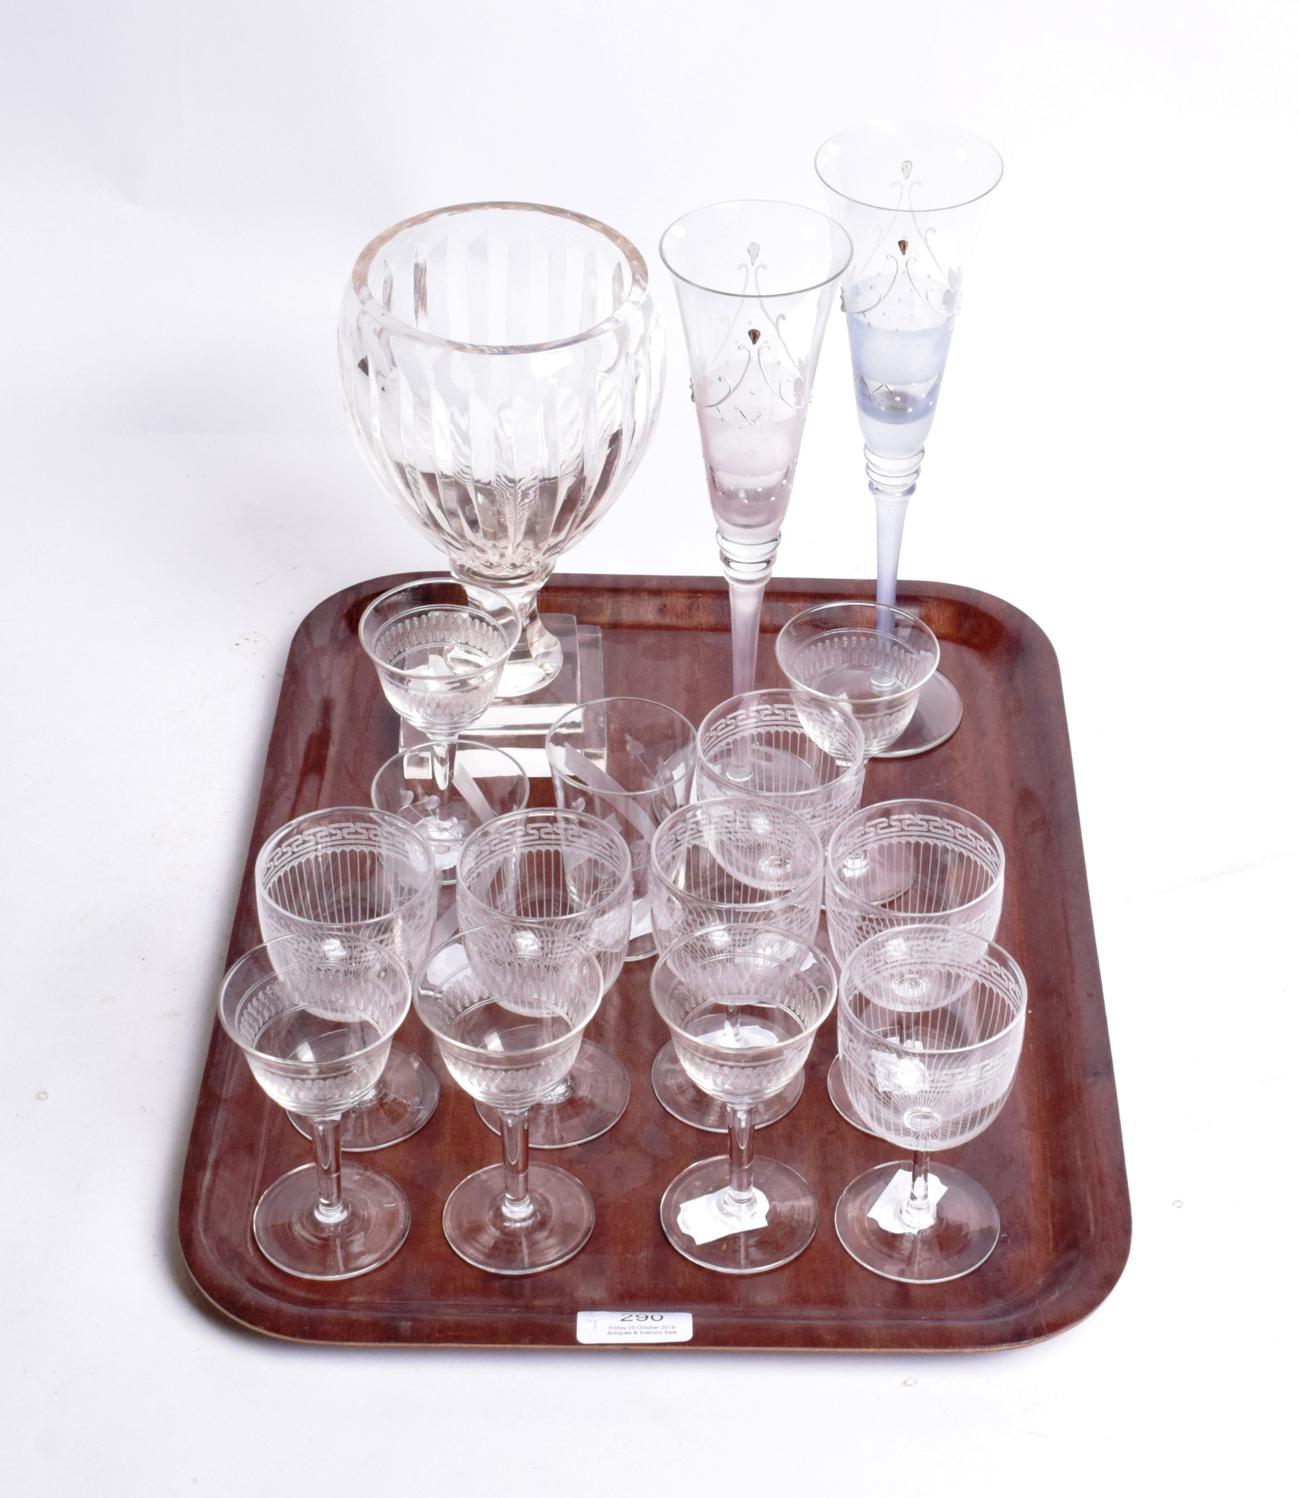 Lot 290 - A glass tazza; a glass vase; two Venetian glasses; a pressed glass charger with thirteen...